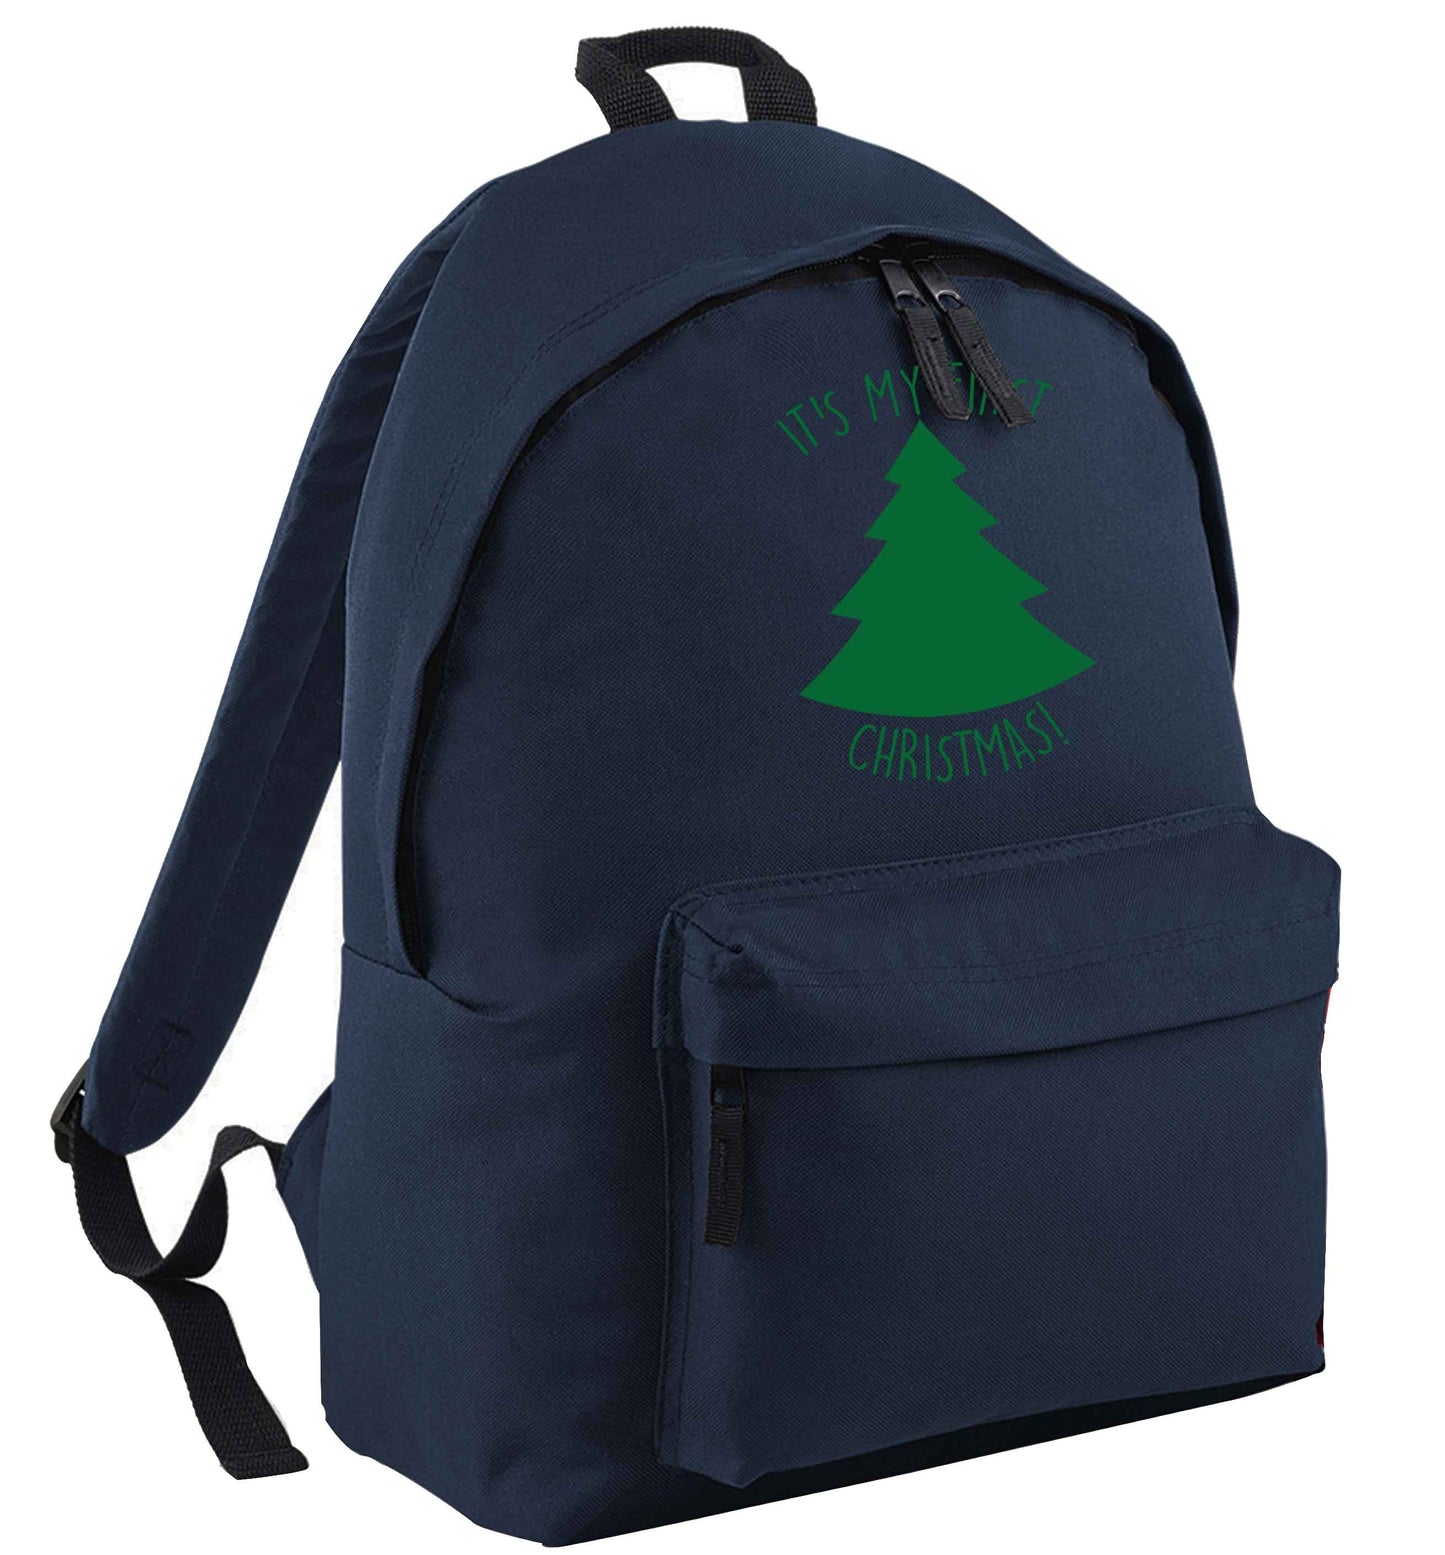 It's my first Christmas - tree navy adults backpack